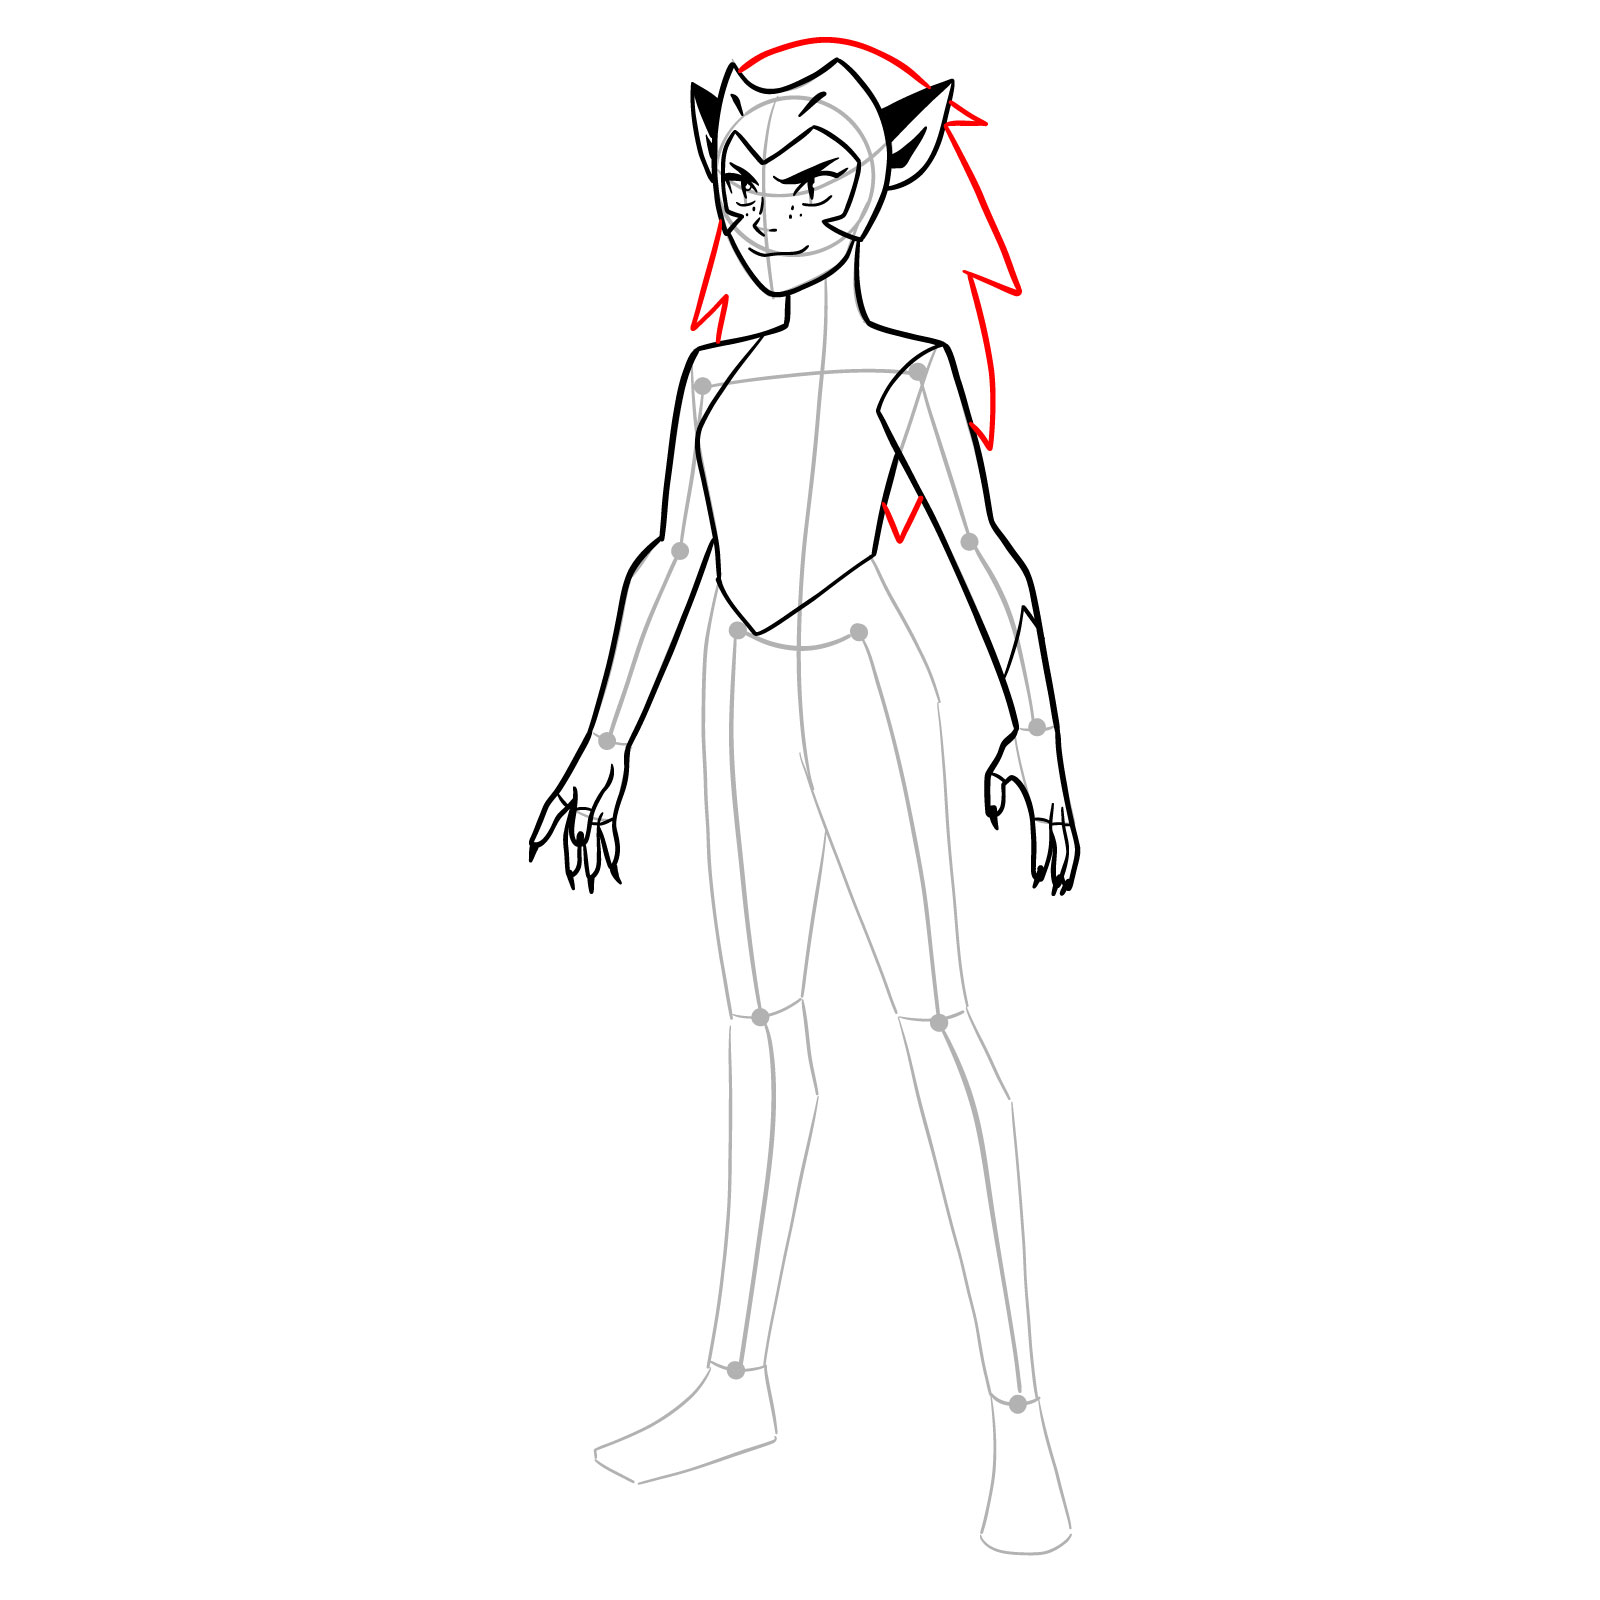 How to draw Catra from She-Ra and the Princesses of Power - step 13